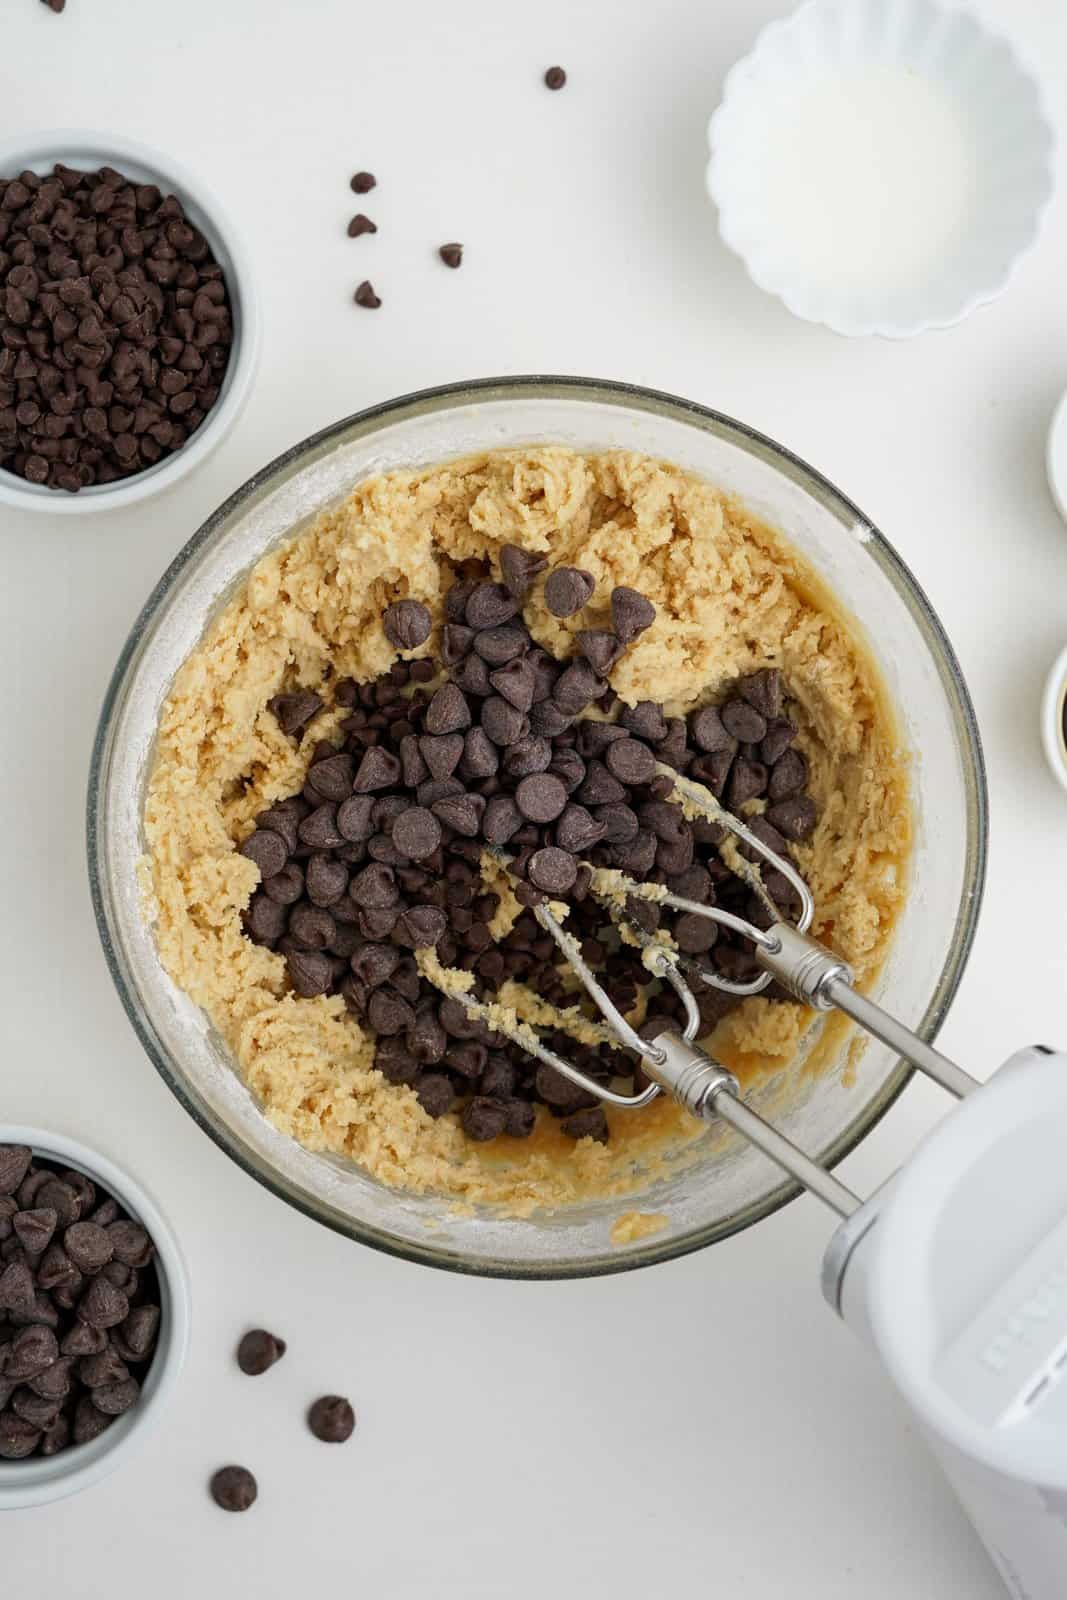 Chocolate chips added to dough in bowl.